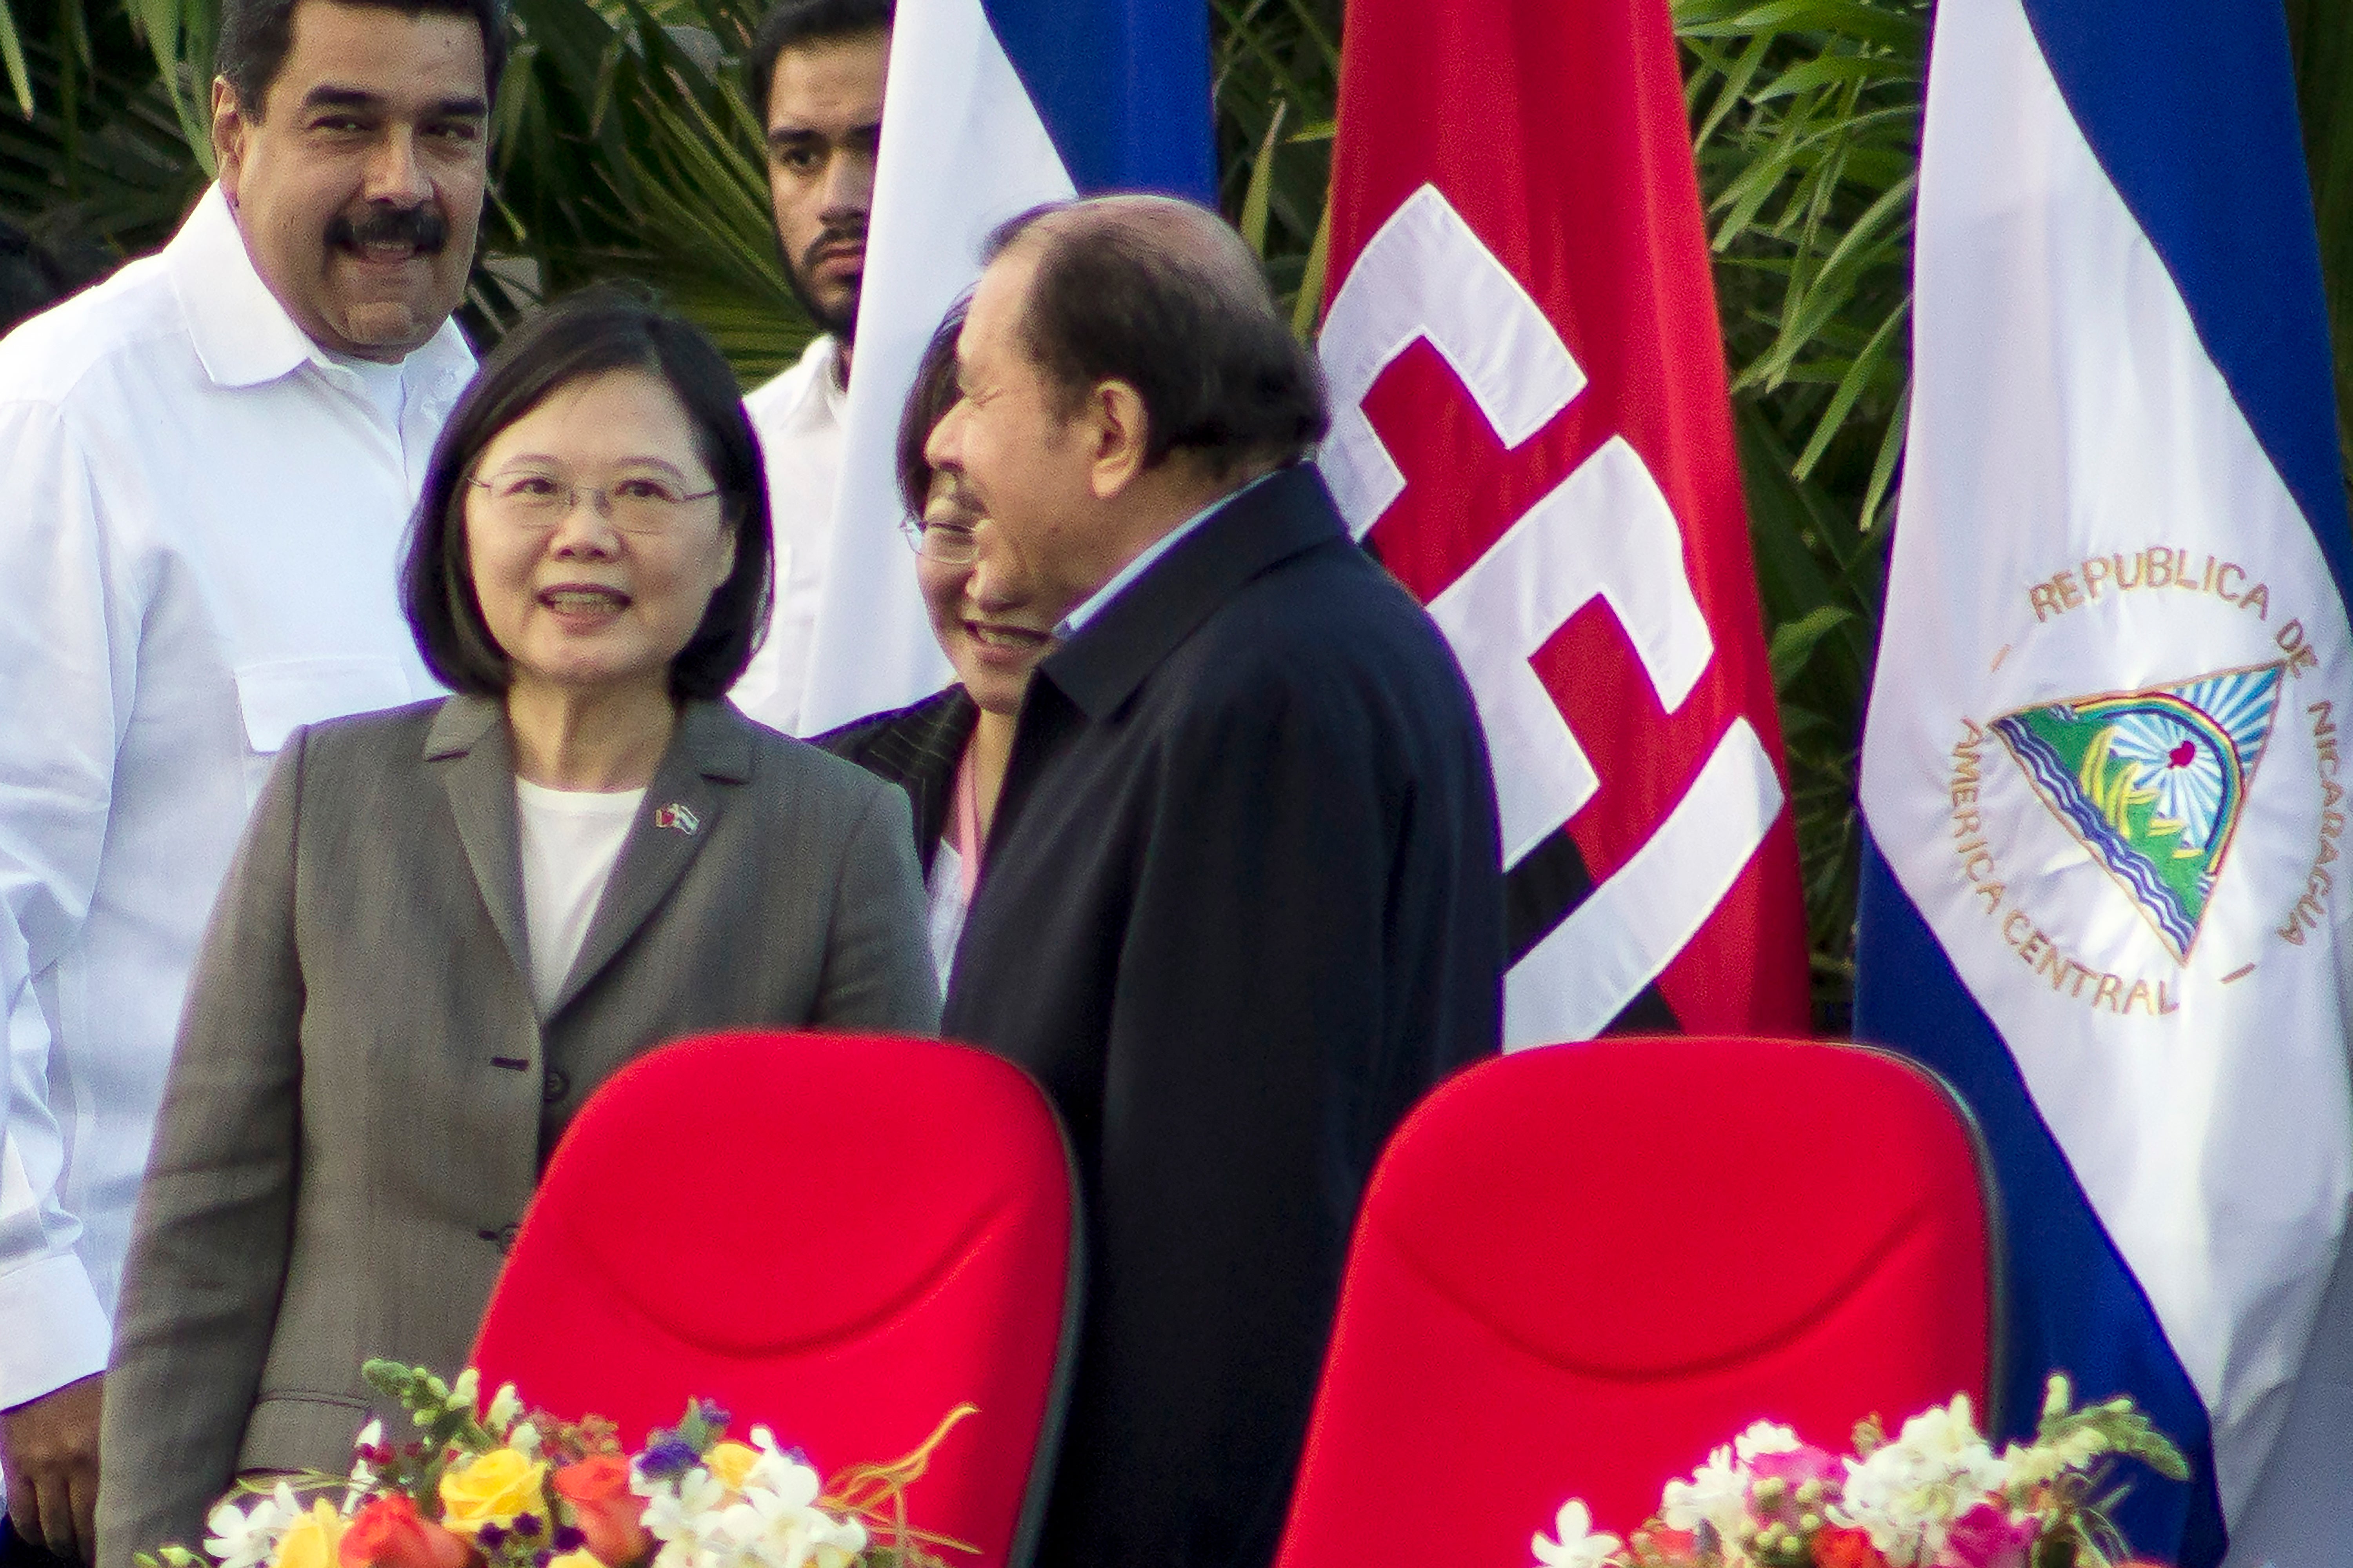 Nicaragua switches diplomatic allegiance to China, dealing blow to